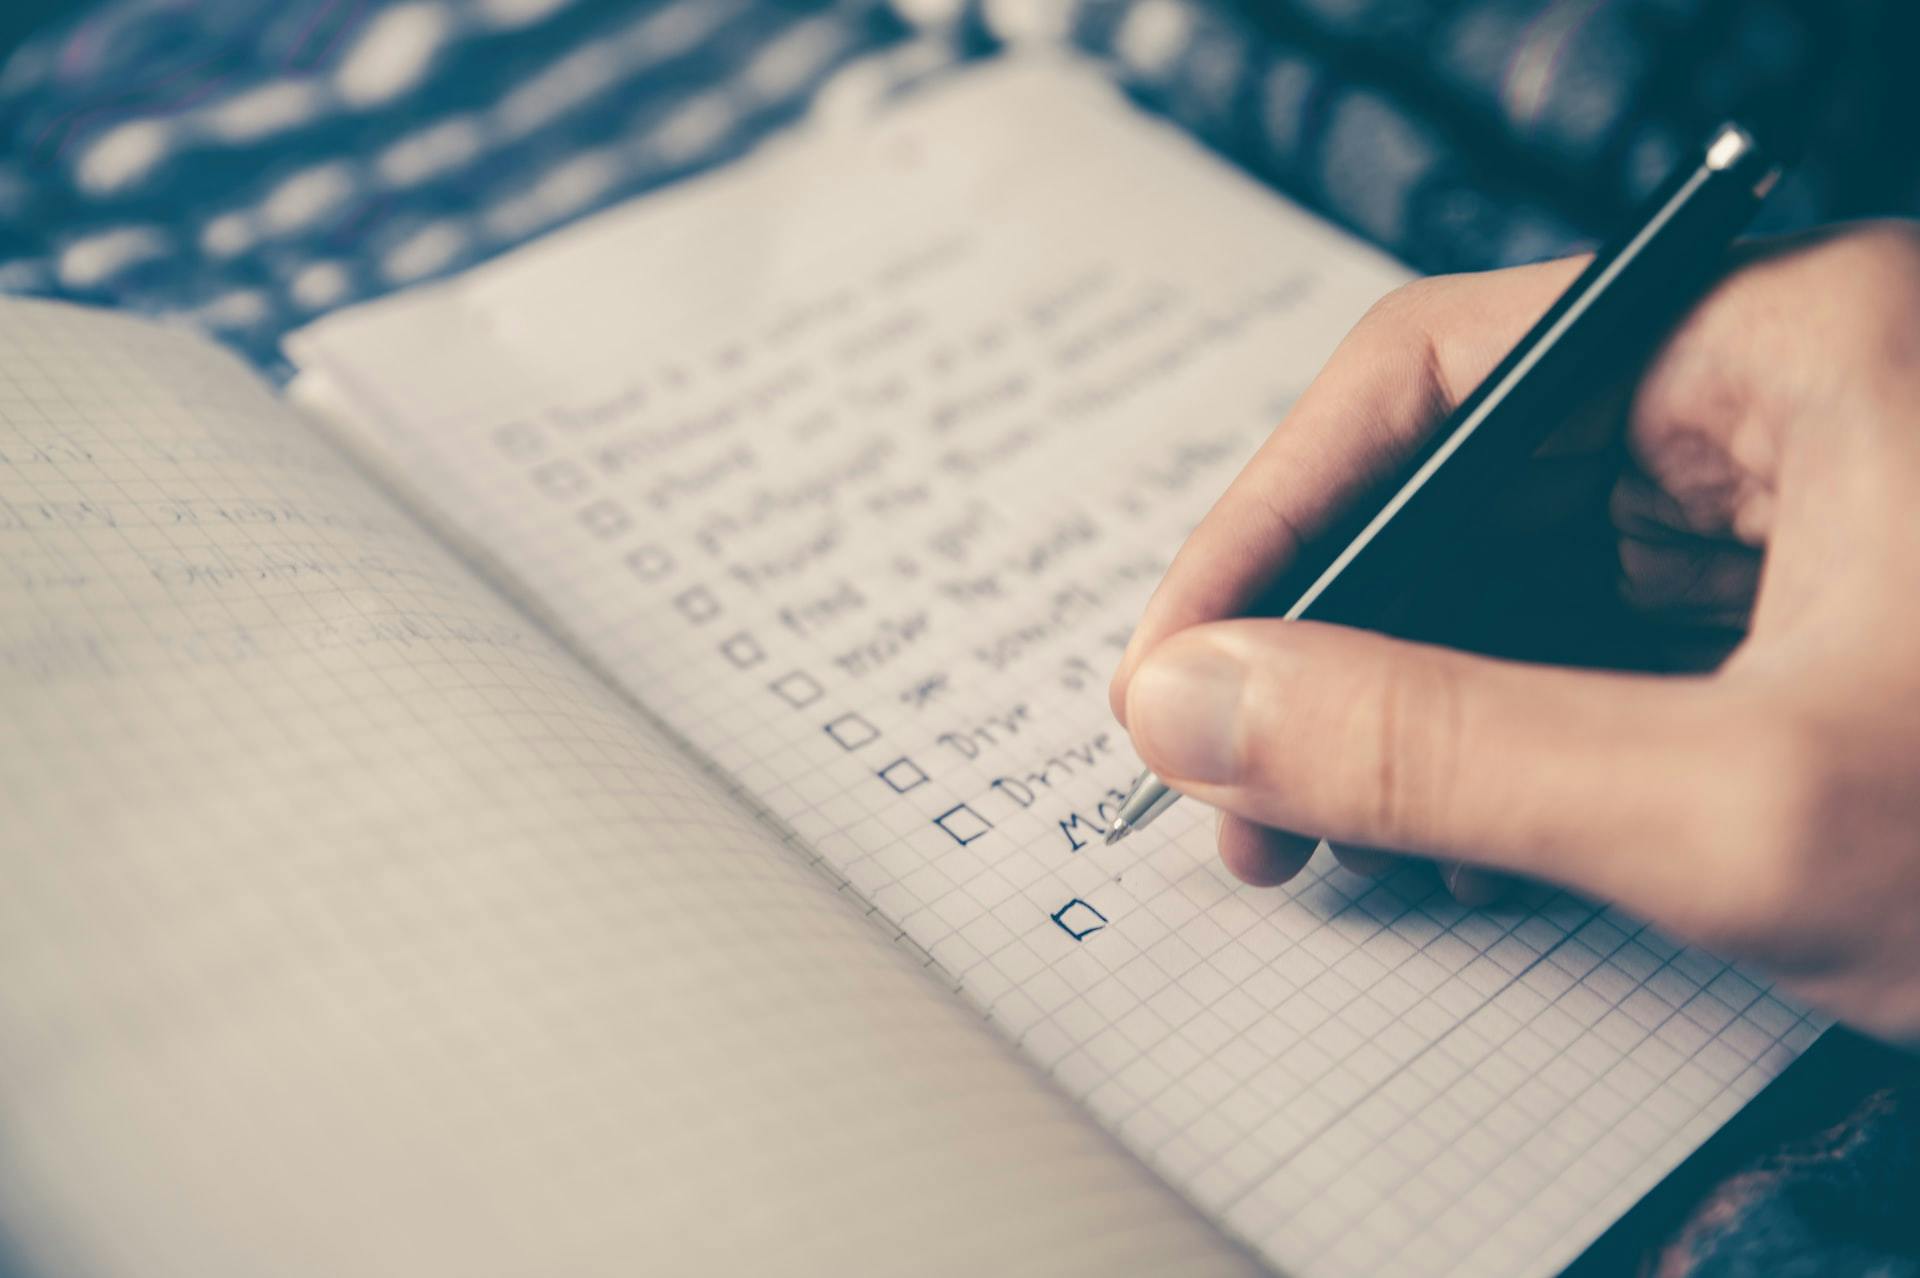 The ultimate website launch checklist